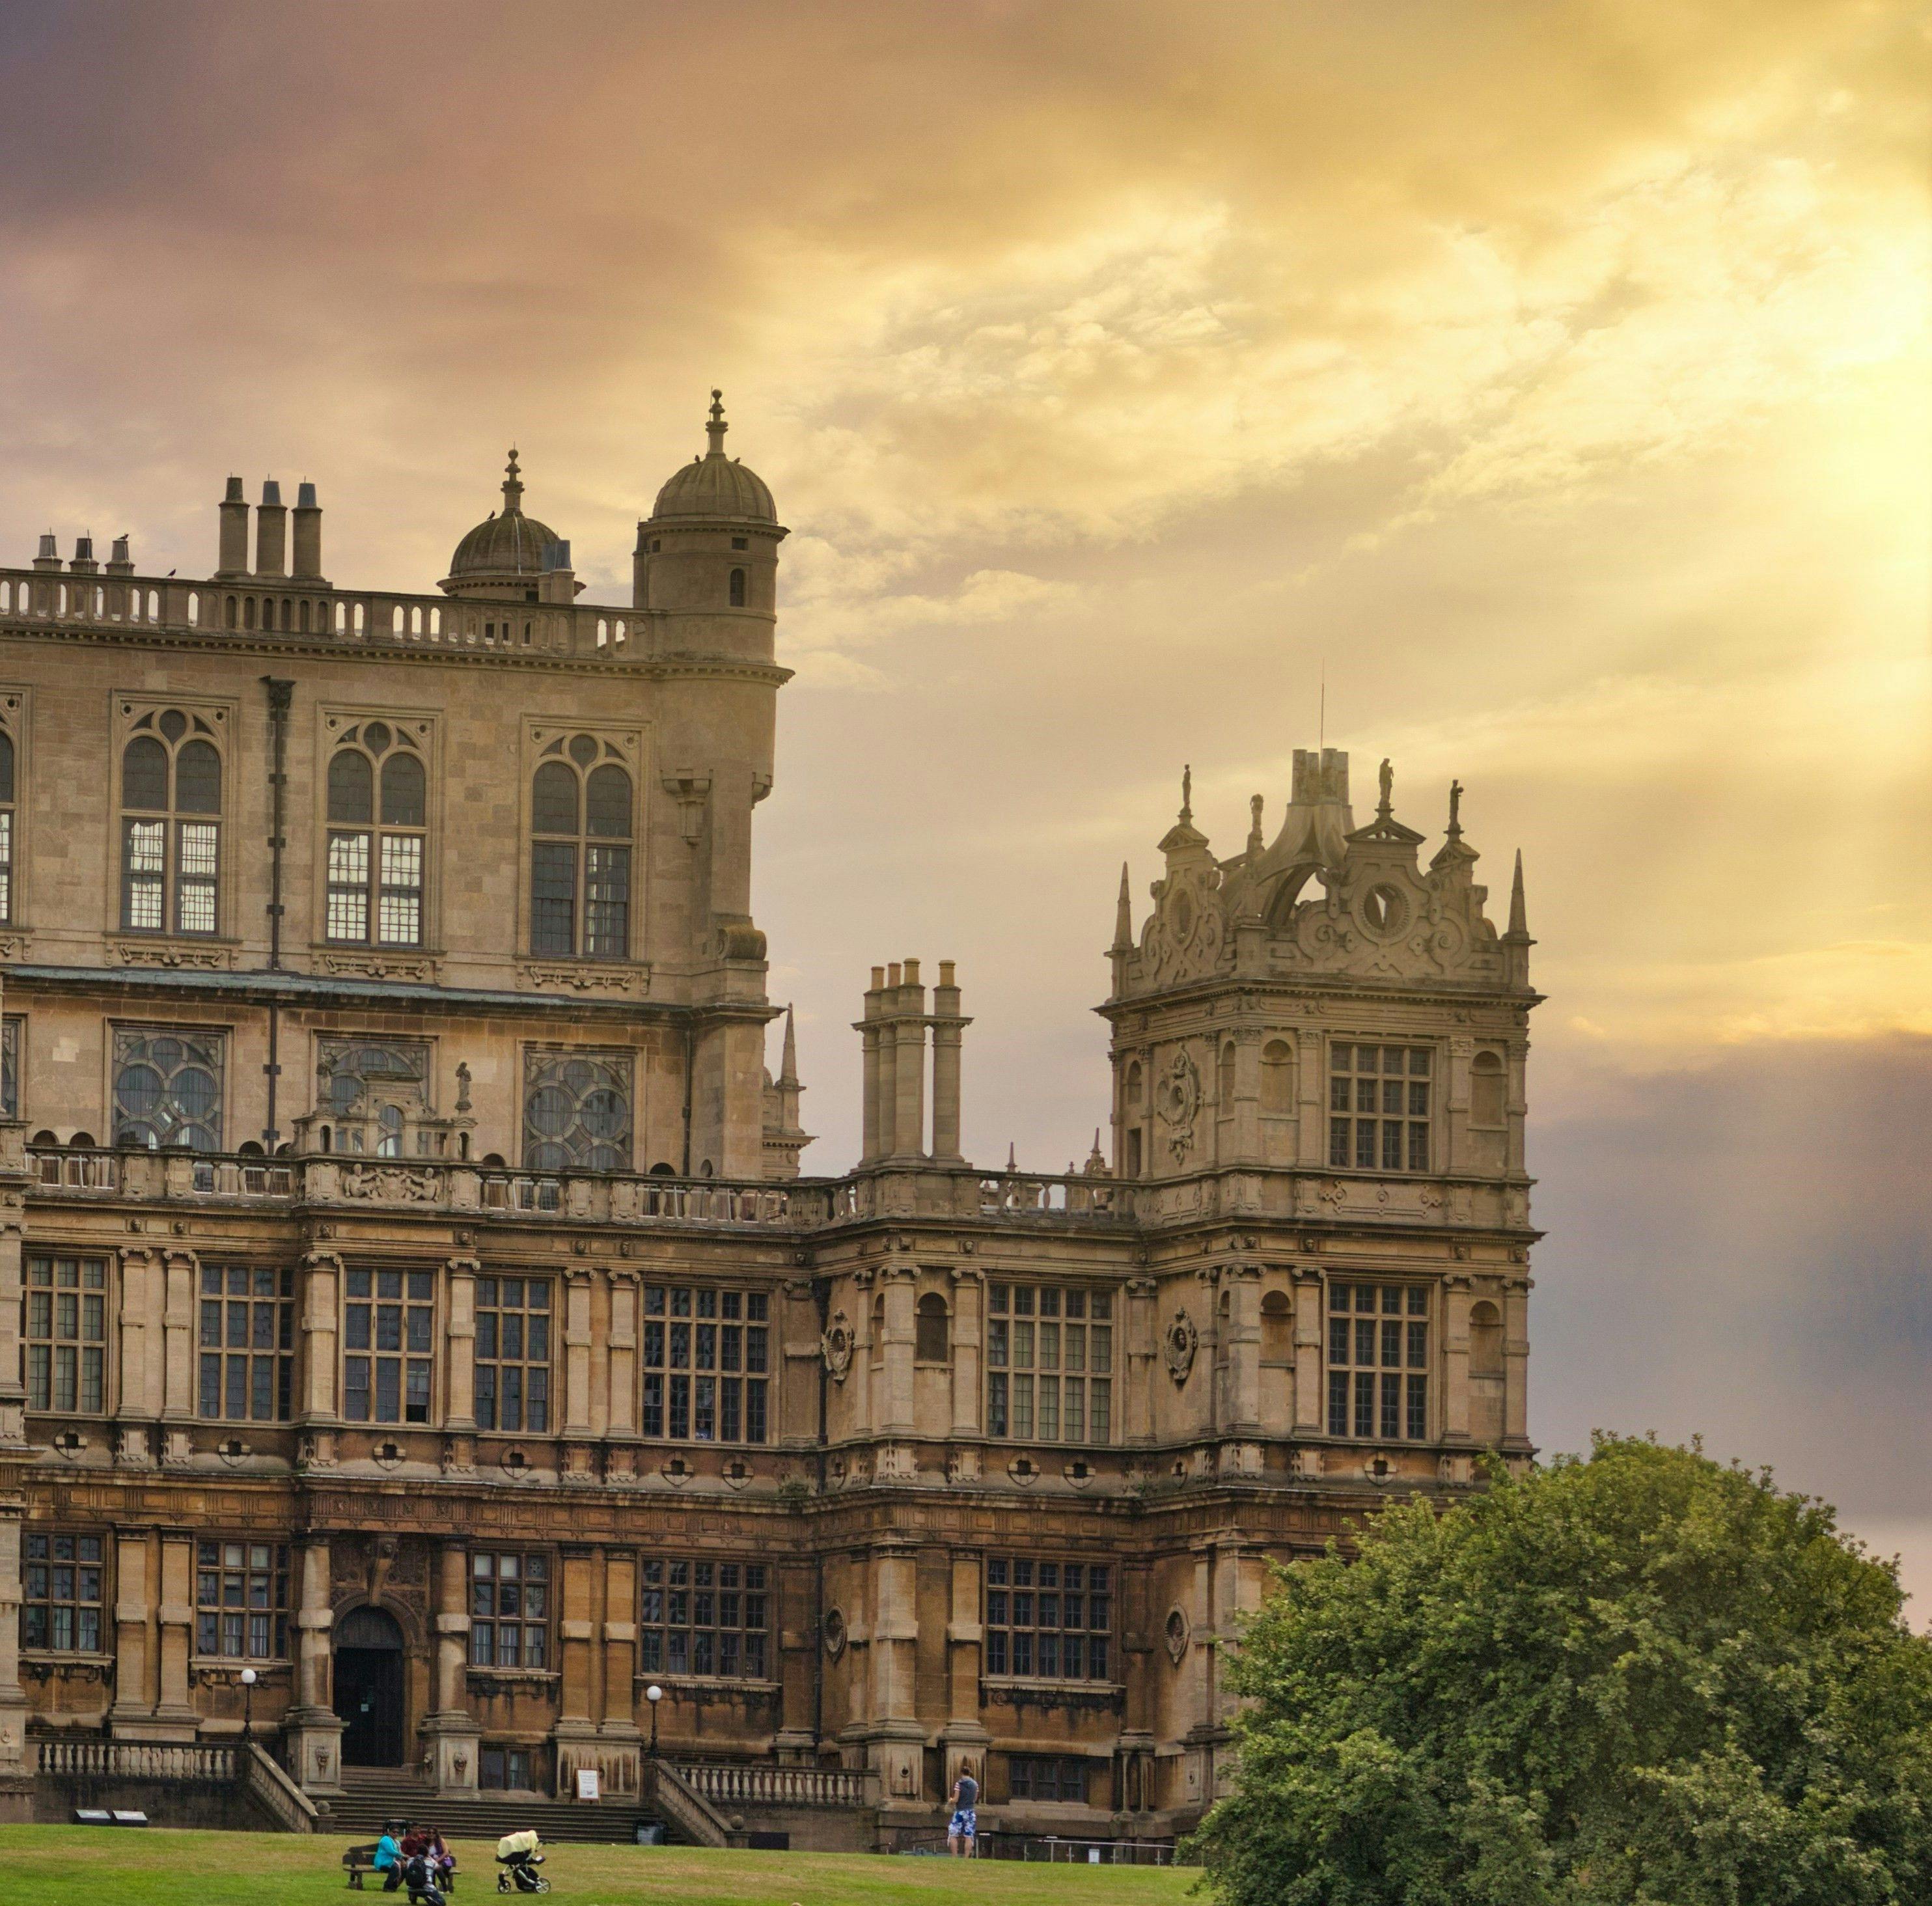 Wollaton Hall in Wollaton Park, Nottingham with the sun breaking through the clouds